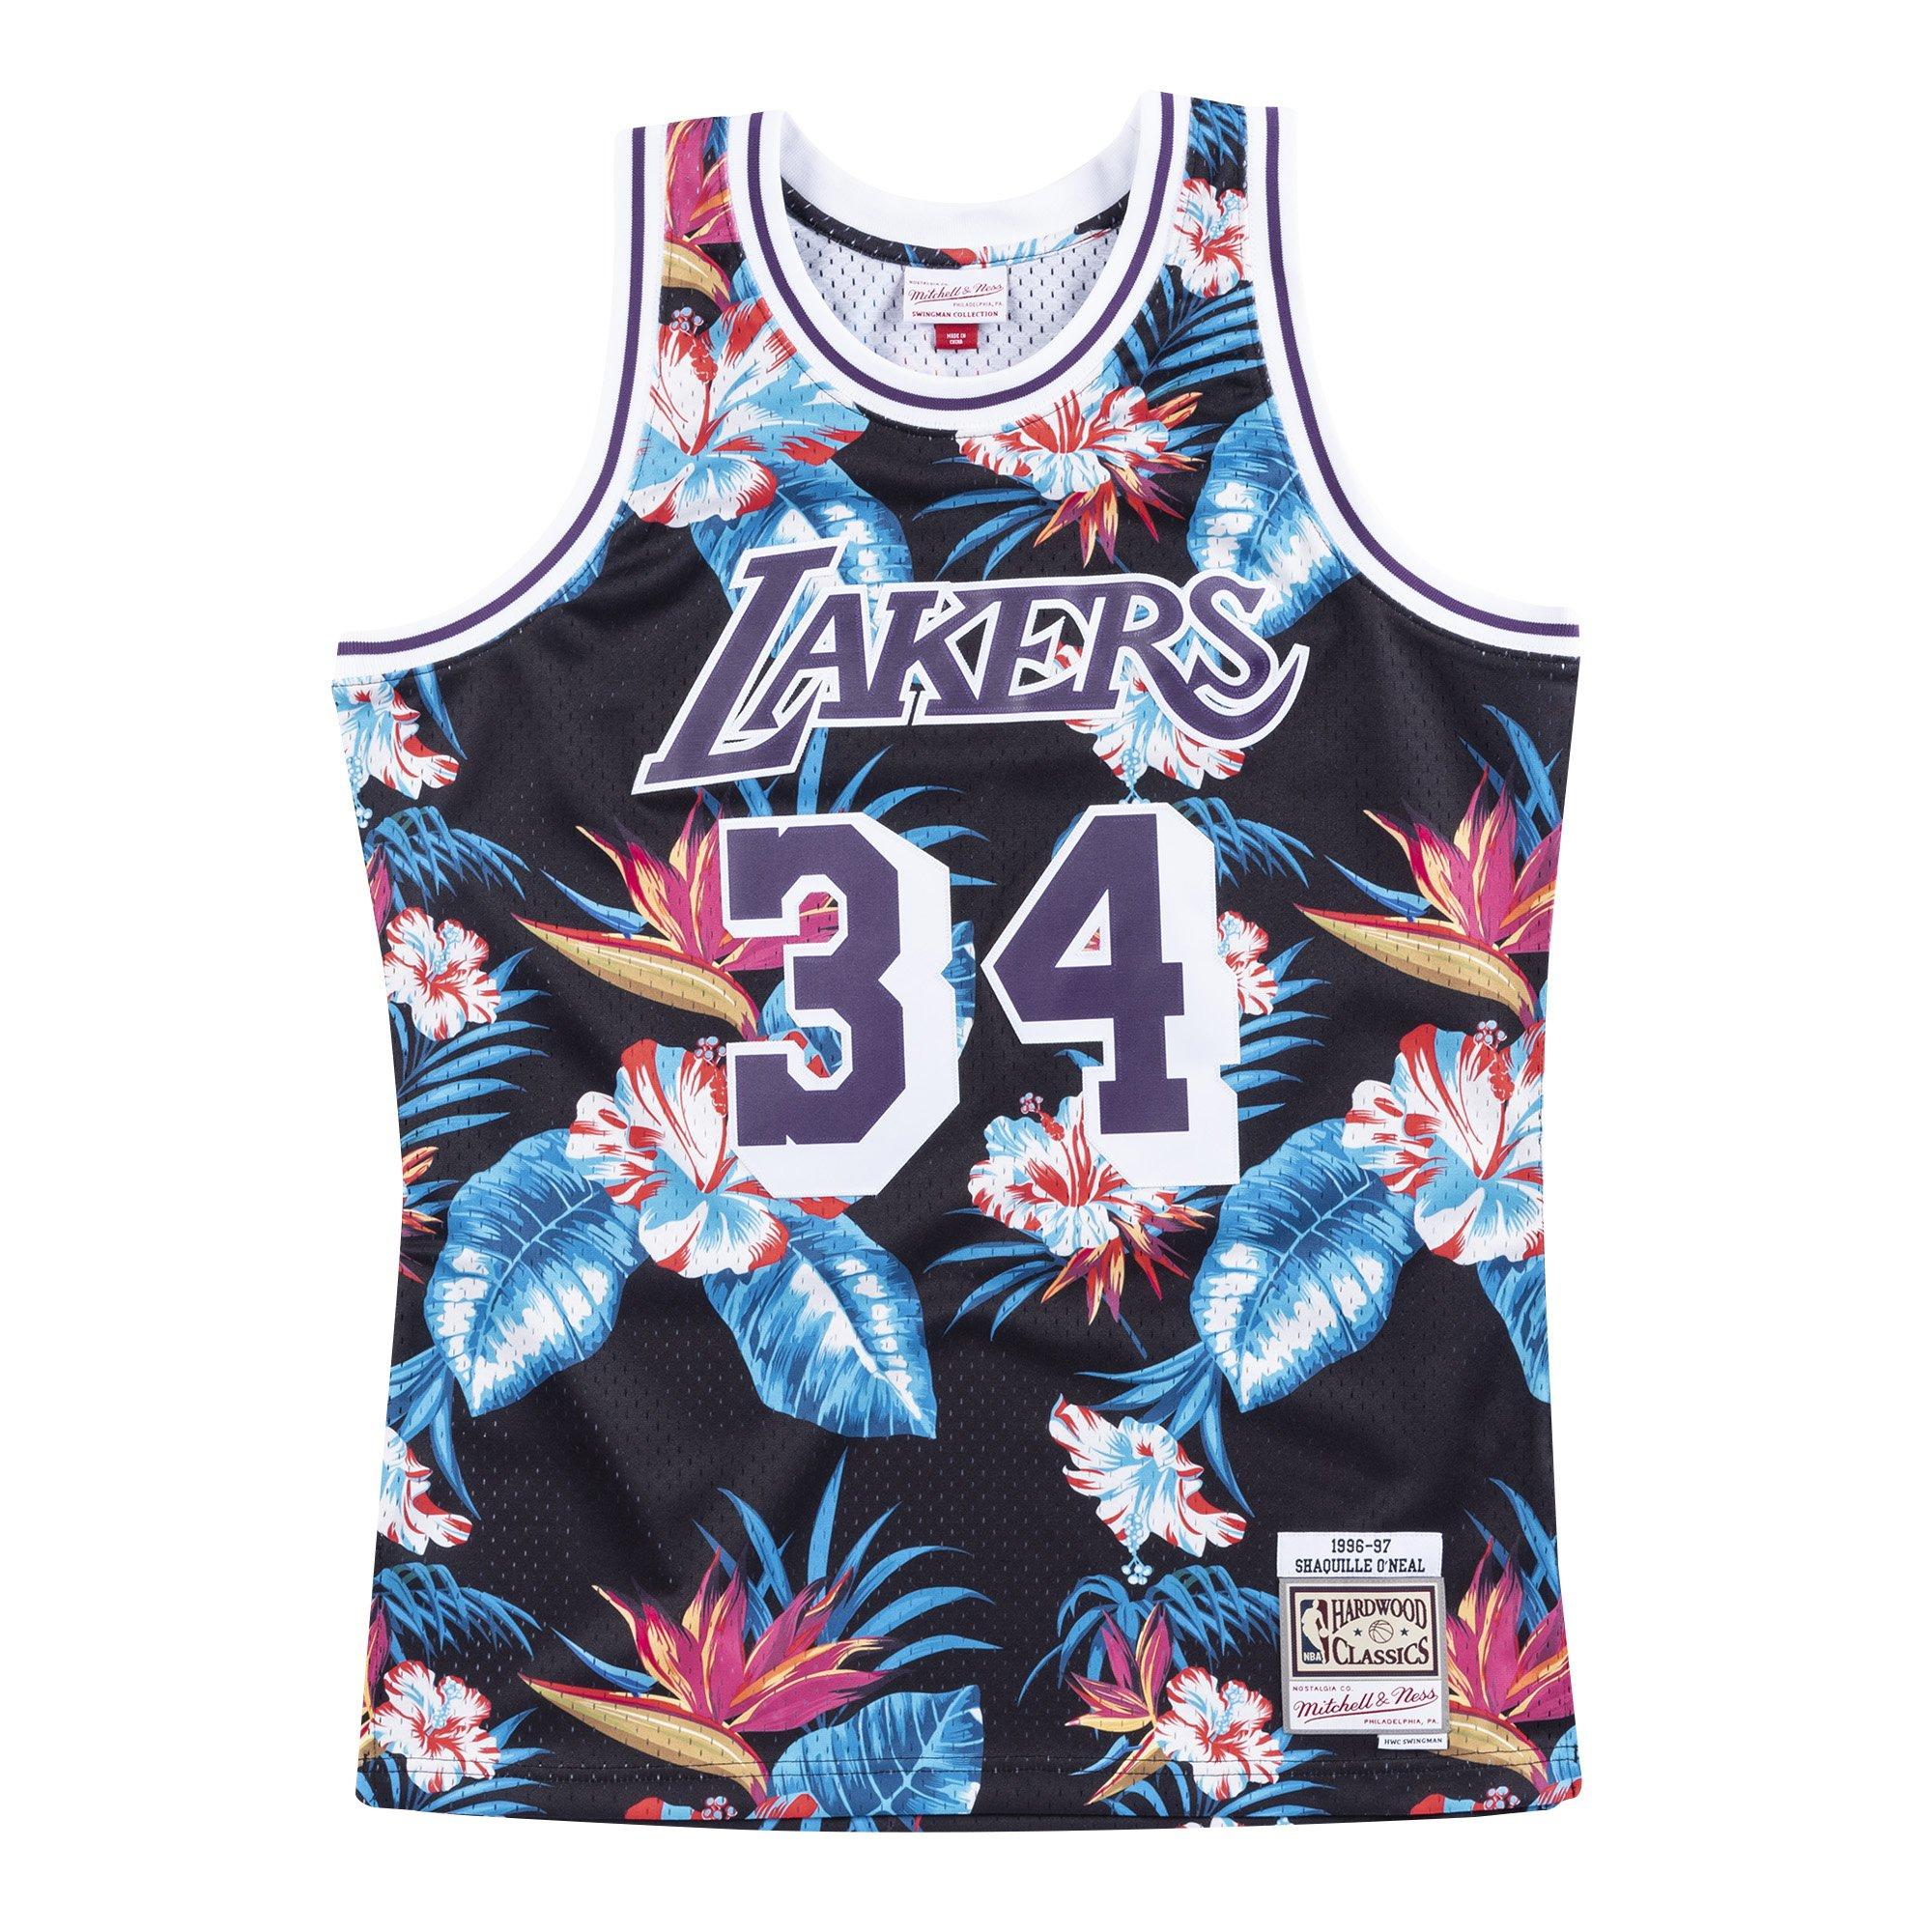 floral basketball jersey